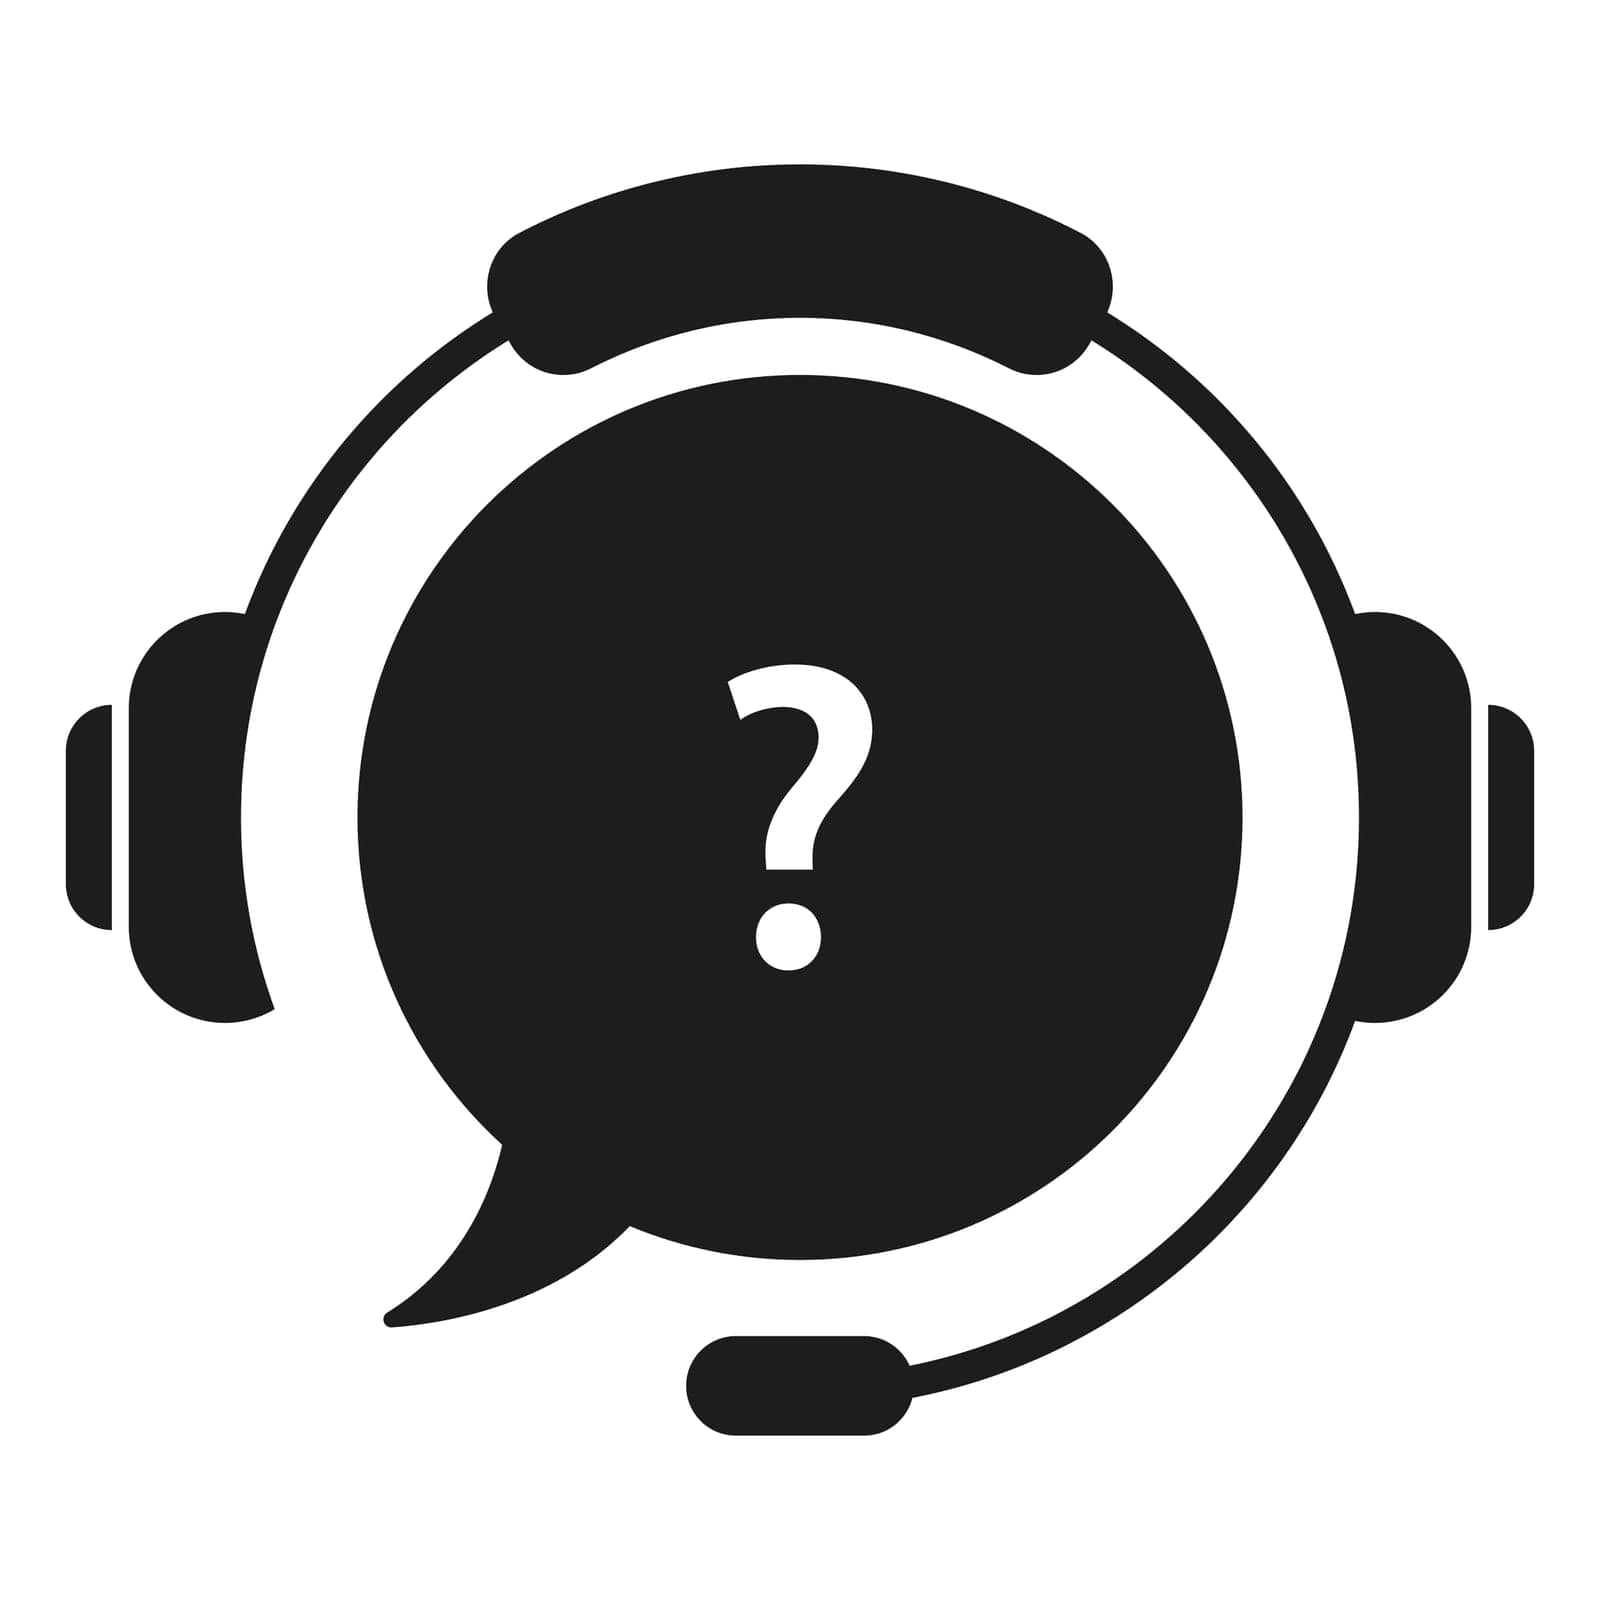 Support Service with Headphones Silhouette Icon. Headset with Question Mark Sign. Hotline and Helpline Concept. Online Help and Customer Support Pictogram. Isolated Vector Illustration by Toxa2x2